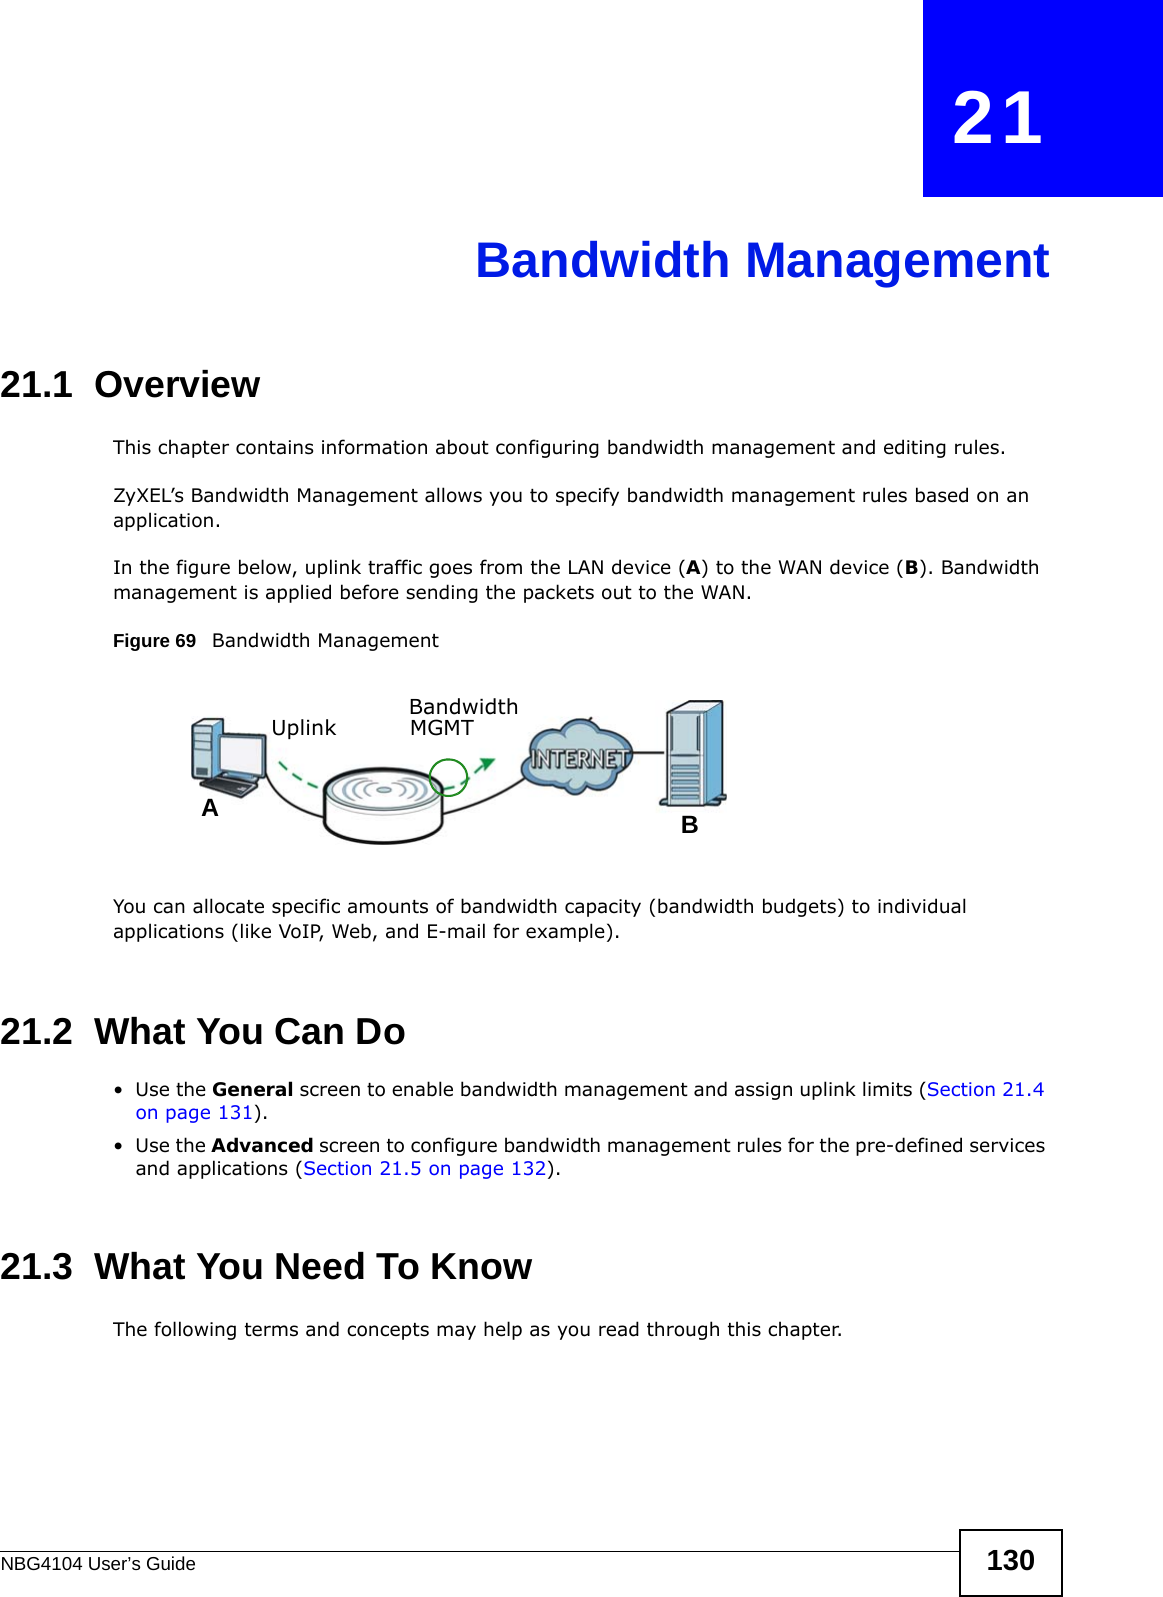 NBG4104 User’s Guide 130CHAPTER   21Bandwidth Management21.1  Overview This chapter contains information about configuring bandwidth management and editing rules.ZyXEL’s Bandwidth Management allows you to specify bandwidth management rules based on an application. In the figure below, uplink traffic goes from the LAN device (A) to the WAN device (B). Bandwidth management is applied before sending the packets out to the WAN.Figure 69   Bandwidth ManagementYou can allocate specific amounts of bandwidth capacity (bandwidth budgets) to individual applications (like VoIP, Web, and E-mail for example).21.2  What You Can Do•Use the General screen to enable bandwidth management and assign uplink limits (Section 21.4 on page 131).•Use the Advanced screen to configure bandwidth management rules for the pre-defined services and applications (Section 21.5 on page 132).21.3  What You Need To KnowThe following terms and concepts may help as you read through this chapter.ABUplink Bandwidth MGMT